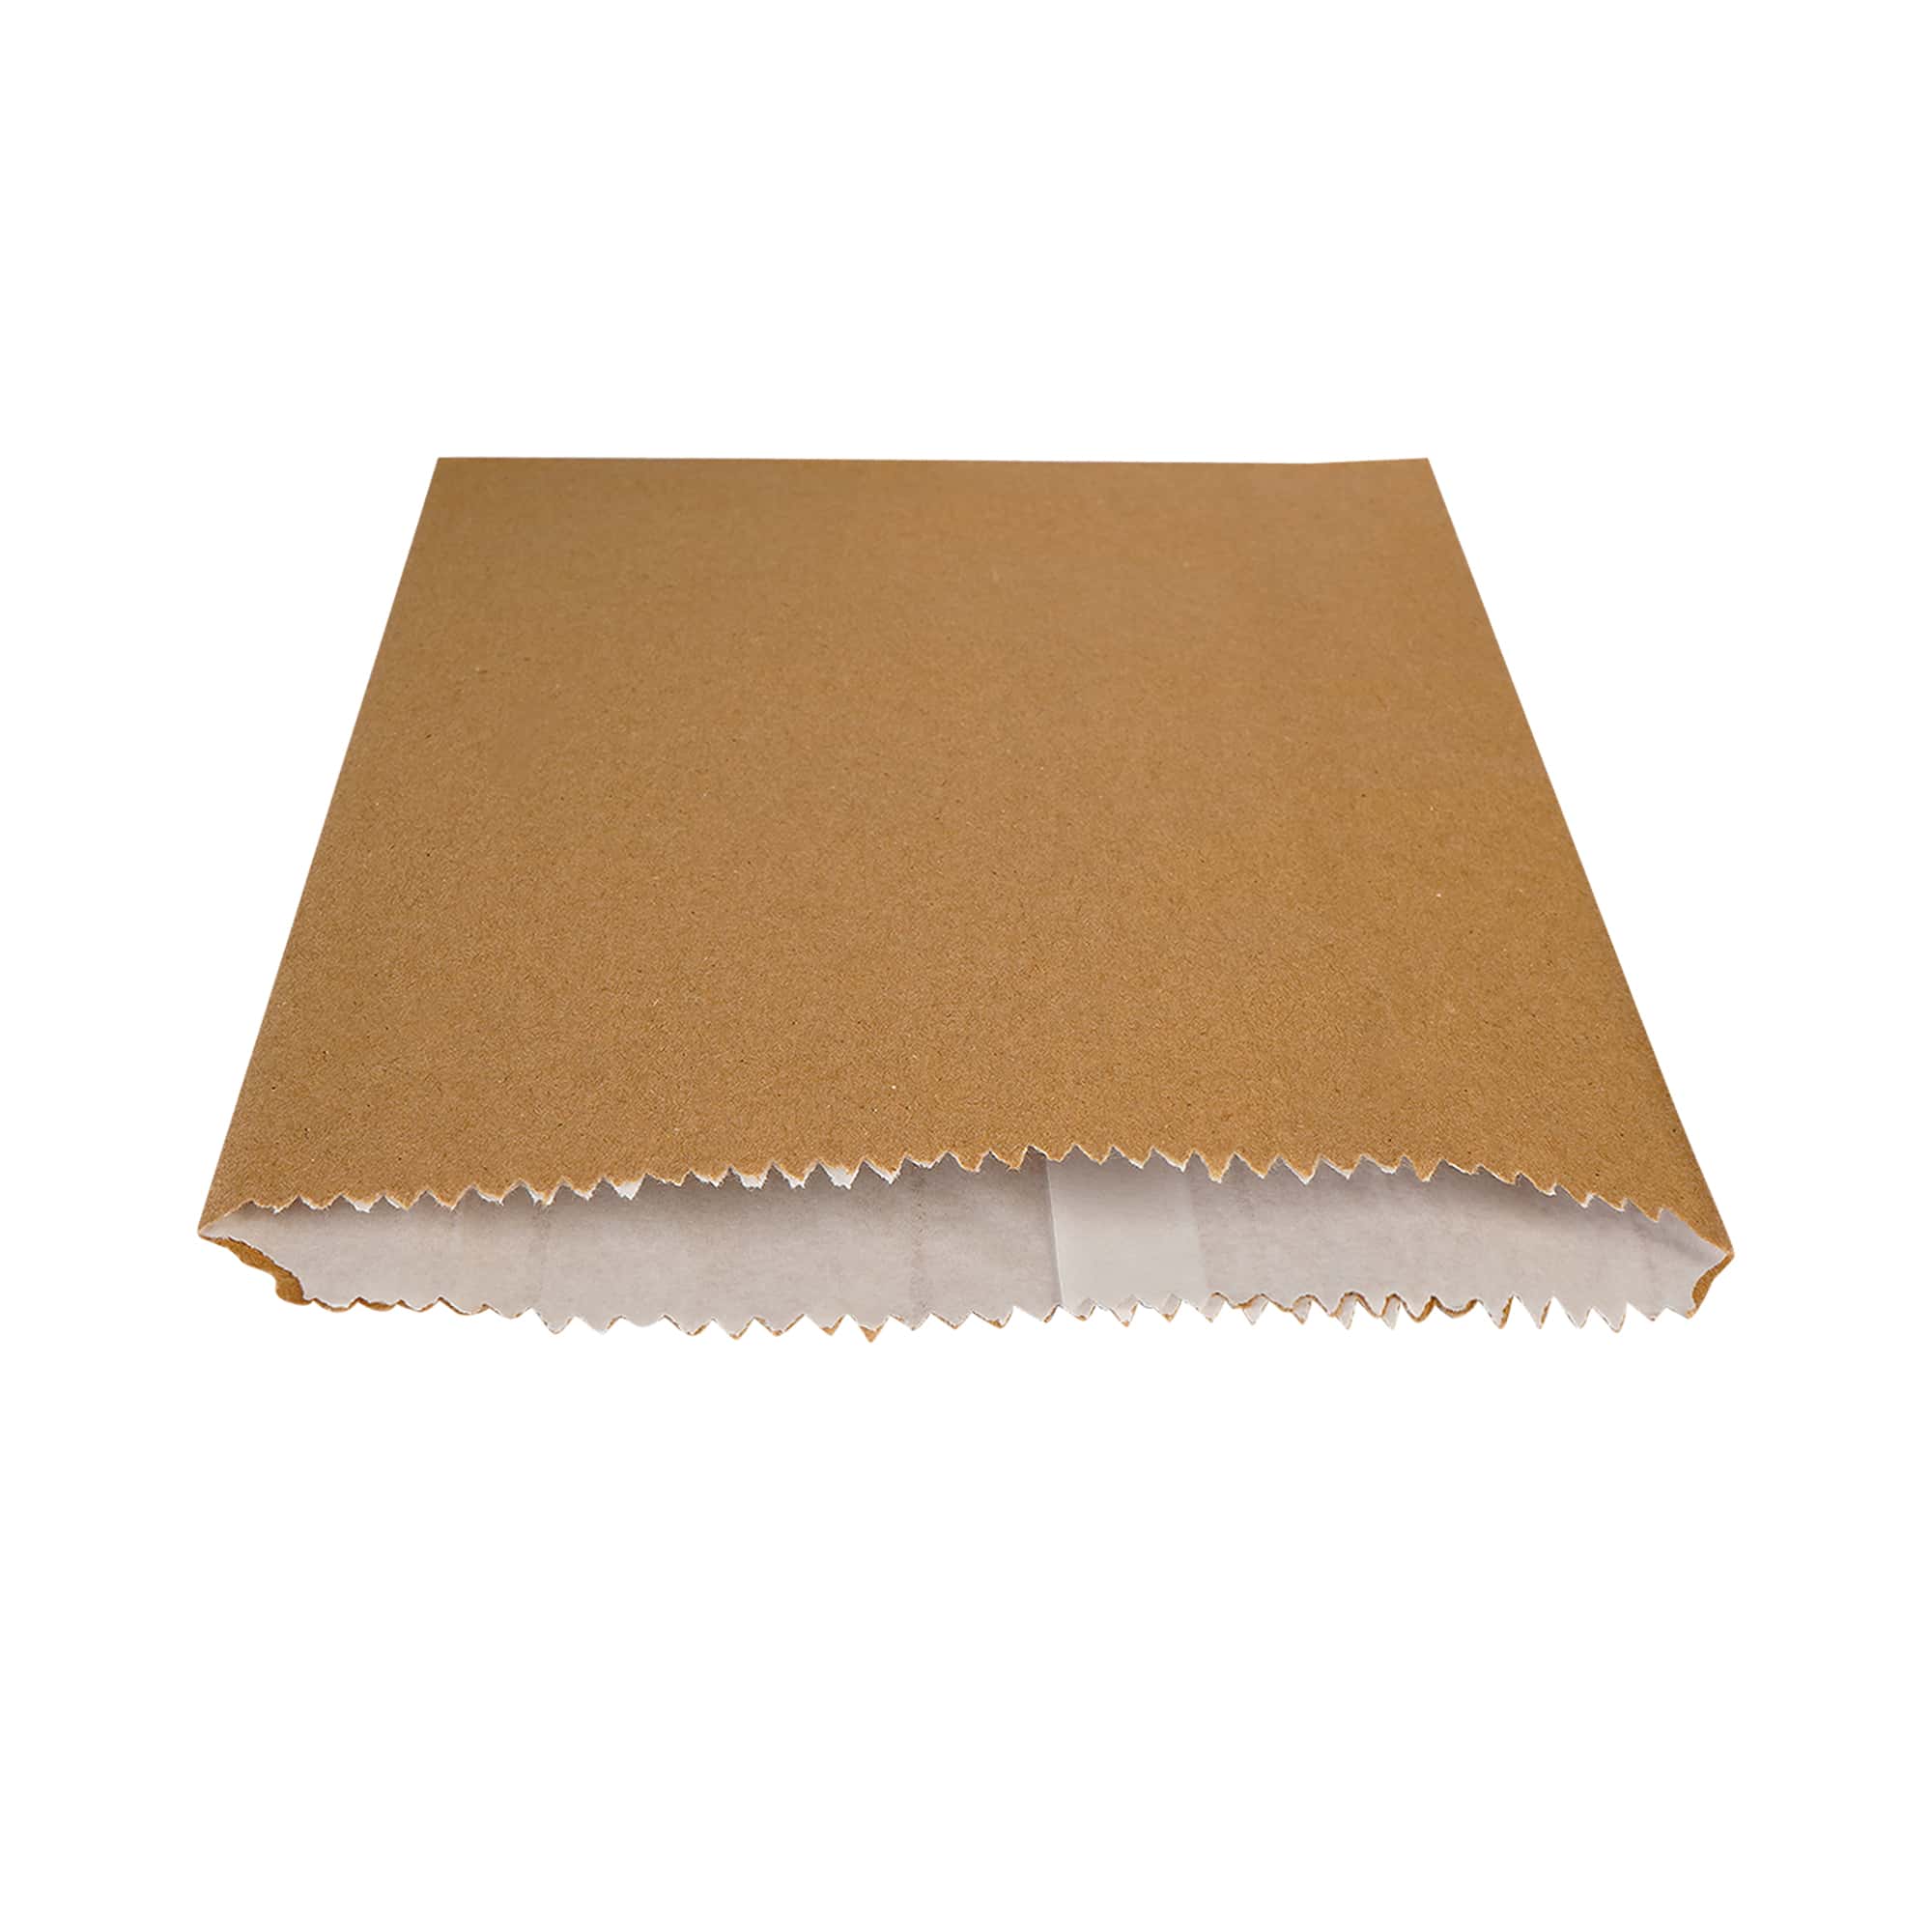 Double Layer paper pouch for oily food packaging coated with OGR paper